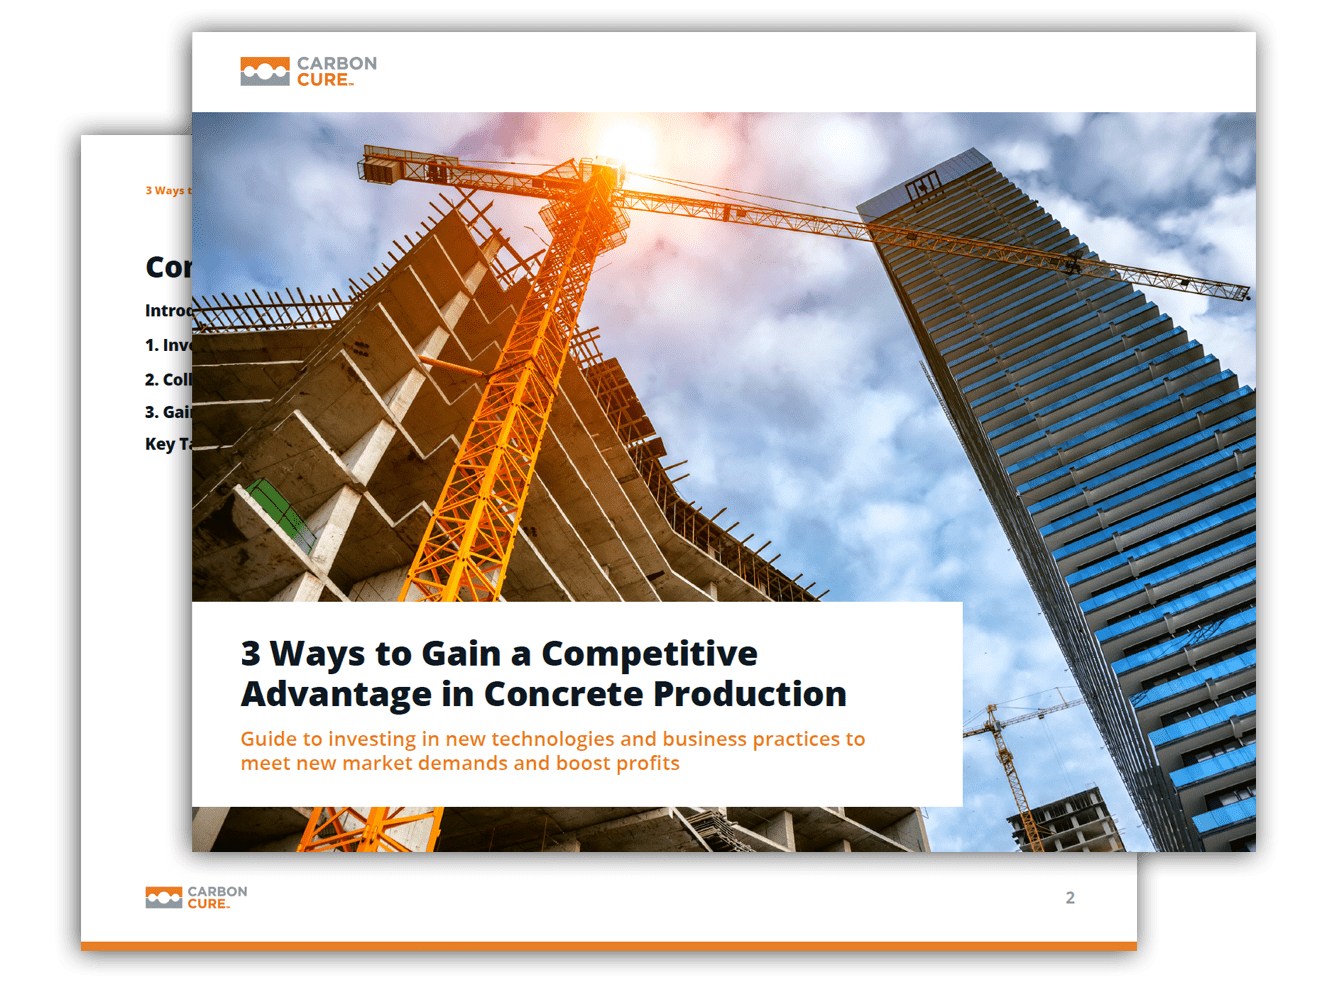 3 Ways to Gain a Competitive Advantage in Concrete Production